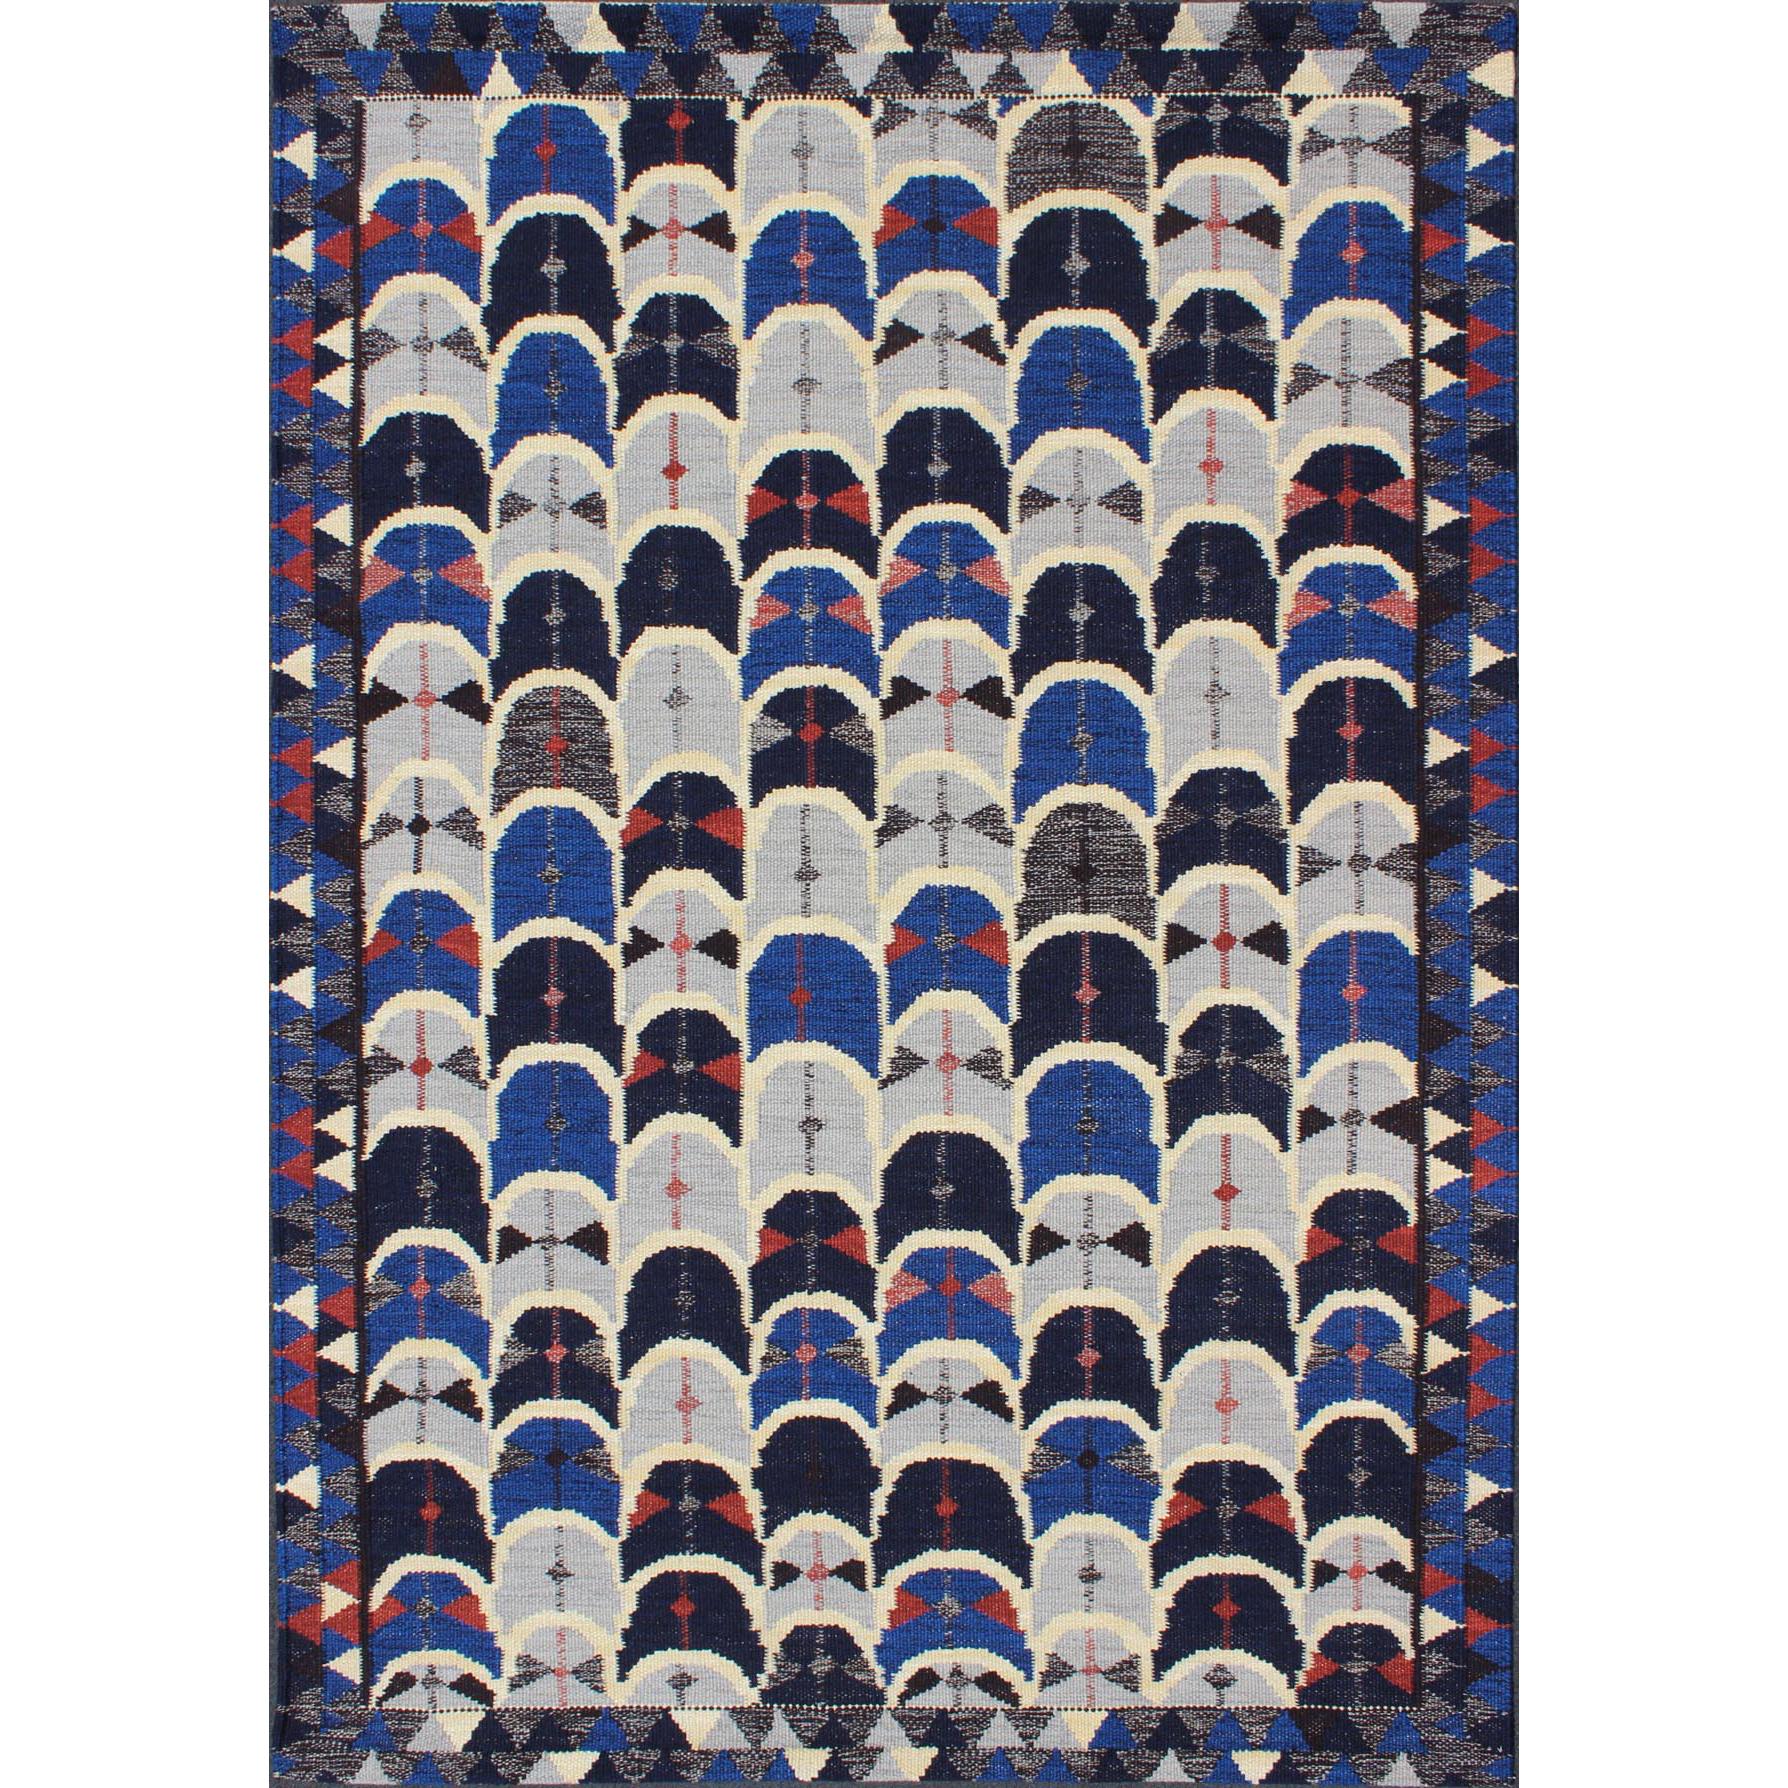 Contemporary Scandinavian Design Flat Weave Rug in Blue, gray, Charcoal, Red